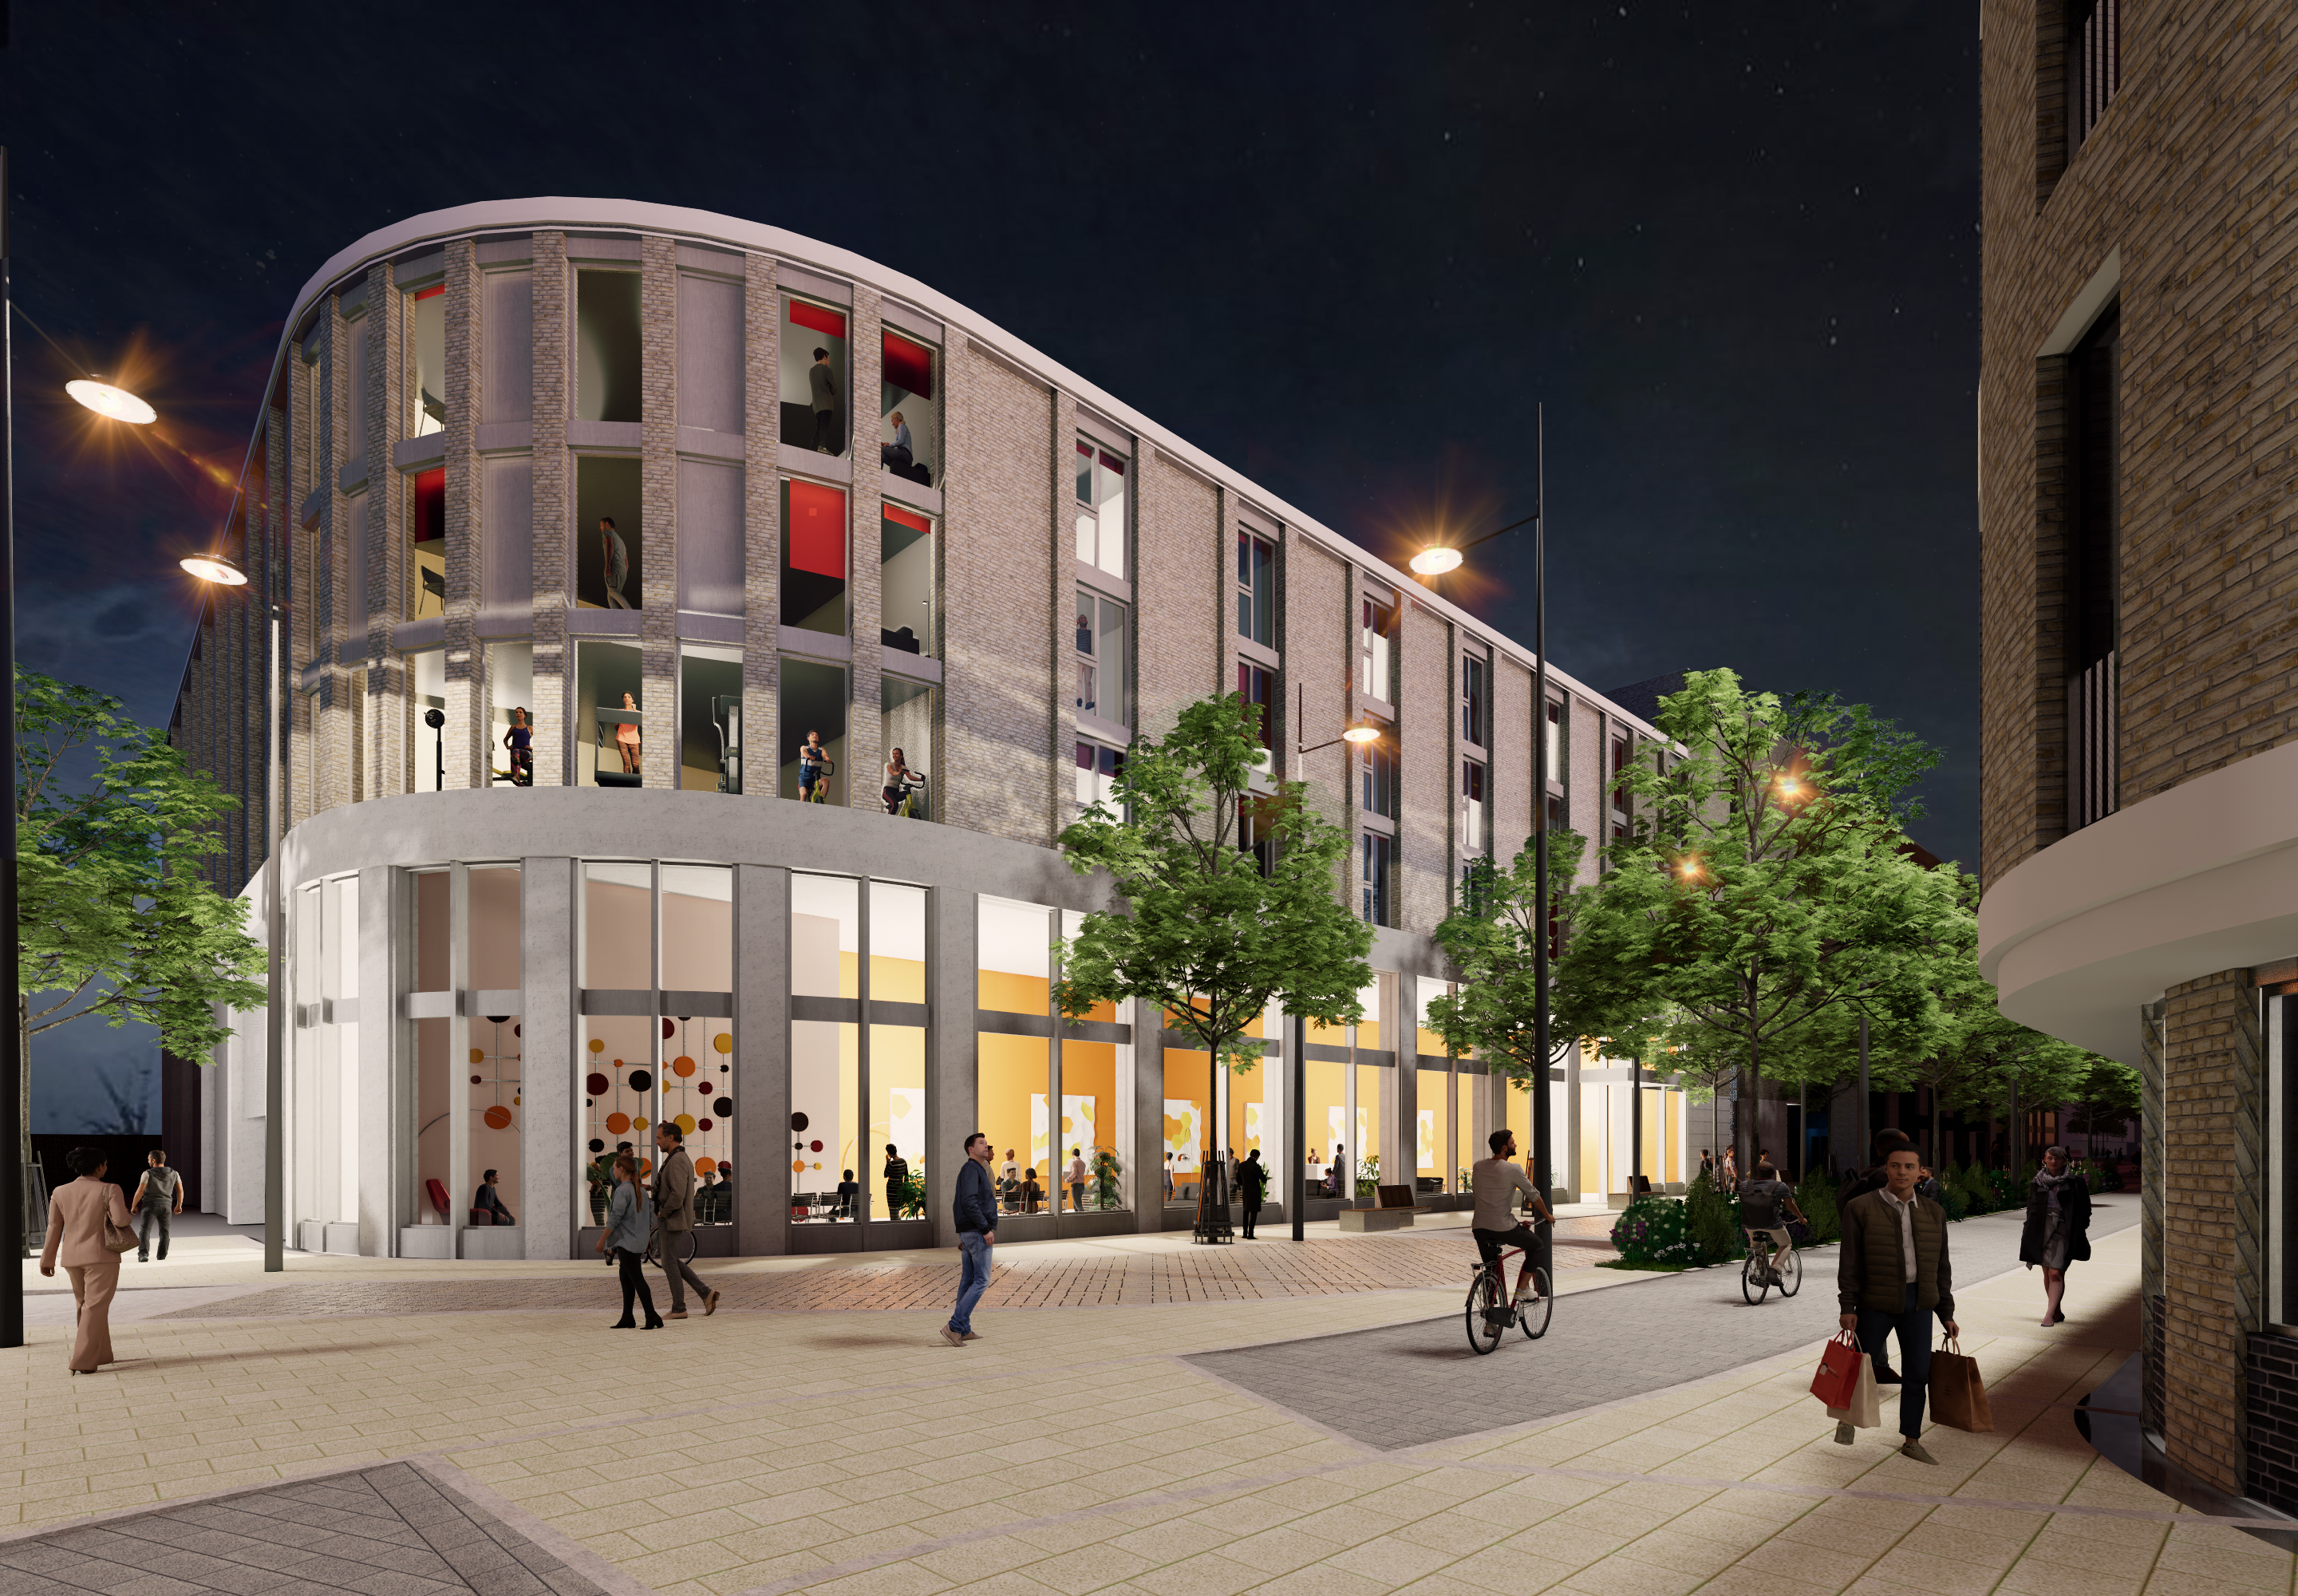 Final piece of Brookgate’s CB1 masterplan secures planning consent